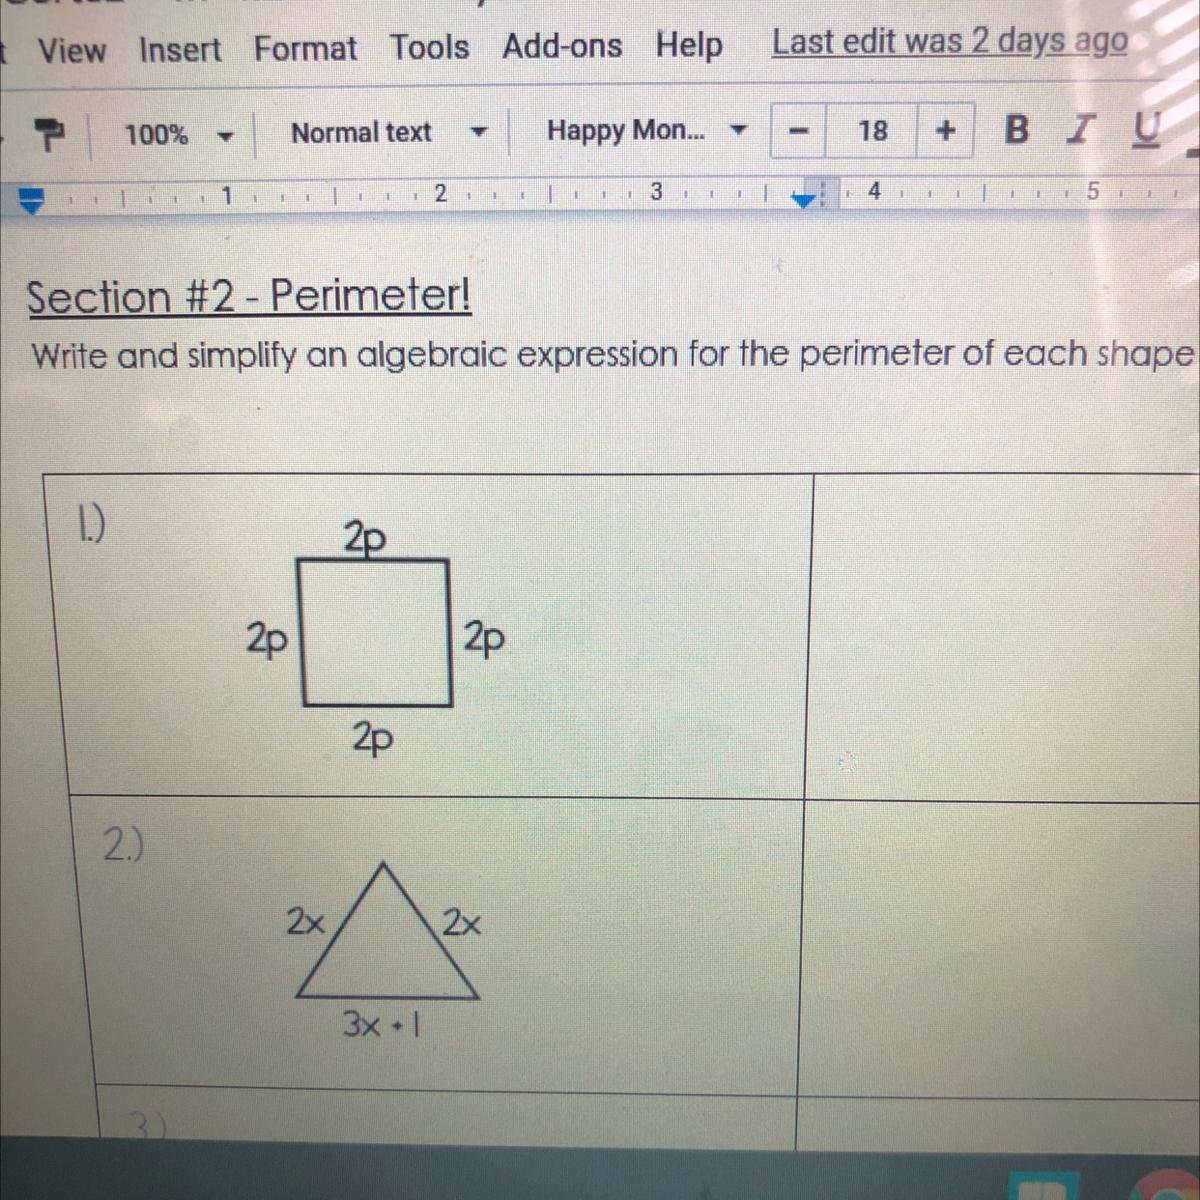 I Need To Write And Simplify An Algebraic Expression For The Perimeter Of Each Shape.please Help!